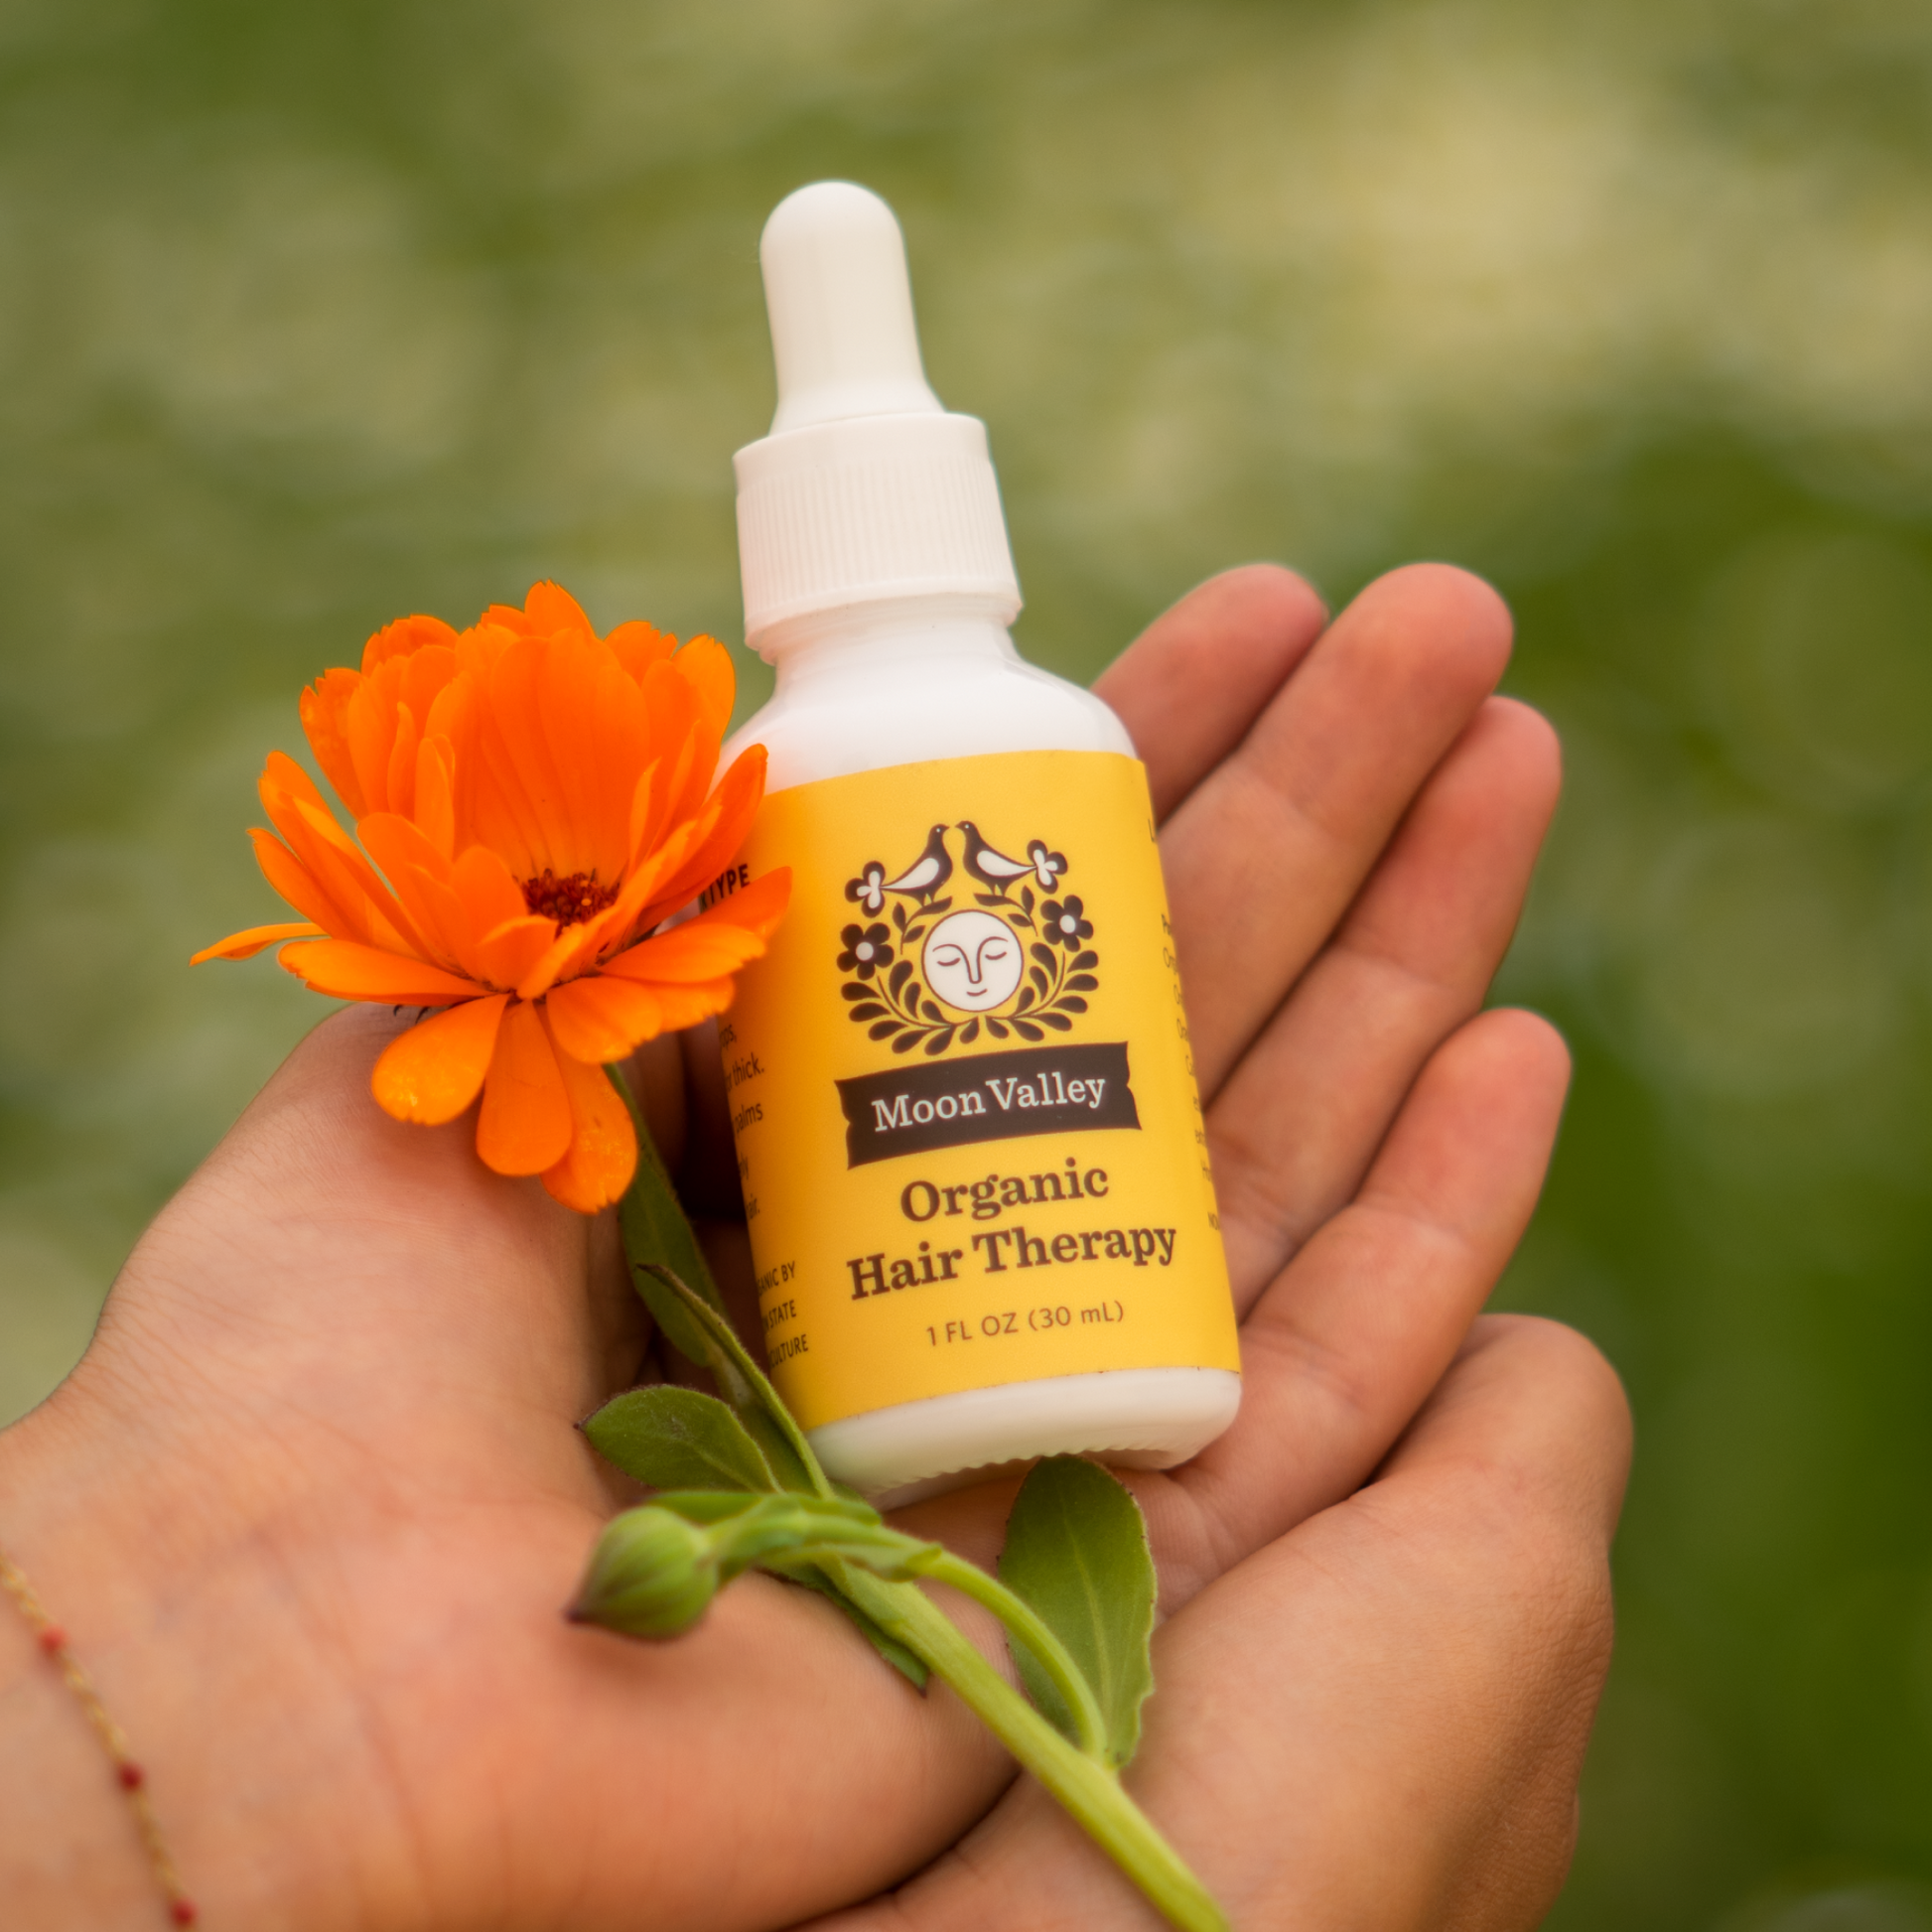 Moon Valley Organics Hair Therapy Every Type hand holding bottle with calendula flower